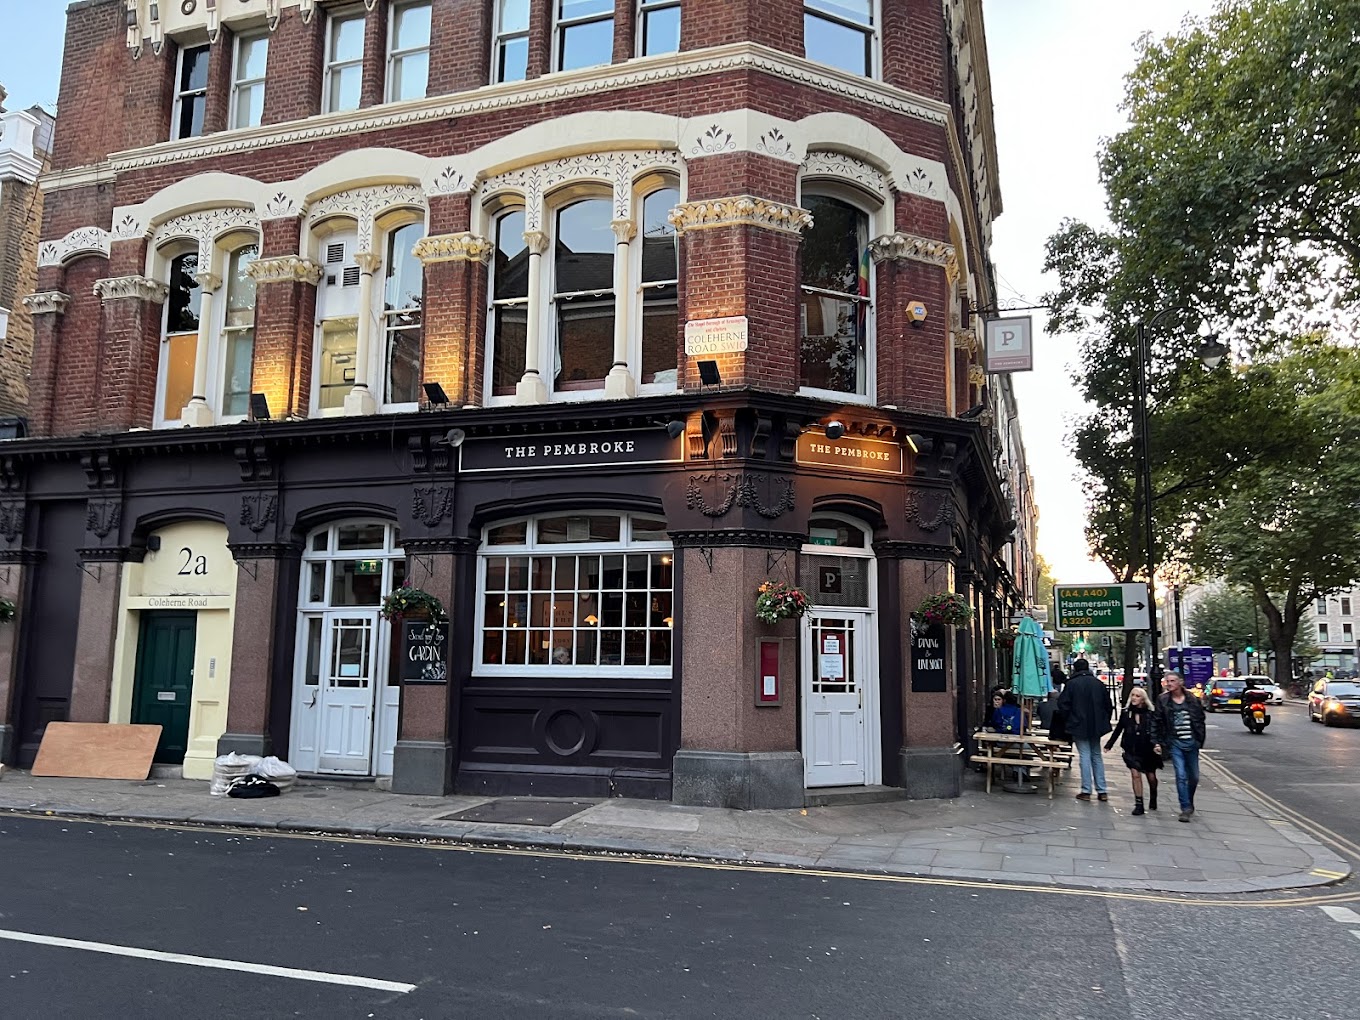 Looking for the best pubs in Earls Court? Look no further than our guide to the top watering holes in the area. Whether you're after a traditional local haunt or a trendy gastropub, we've got you covered. #EarlsCourt #londonpubs Things To Do In London | Things To Do In Earls Court | Best Pubs In Earls Court| Best Pubs In London | Best Pub Food | Sunday Roast | Places To Eat In London #londonnightlife | Things To Do At Night